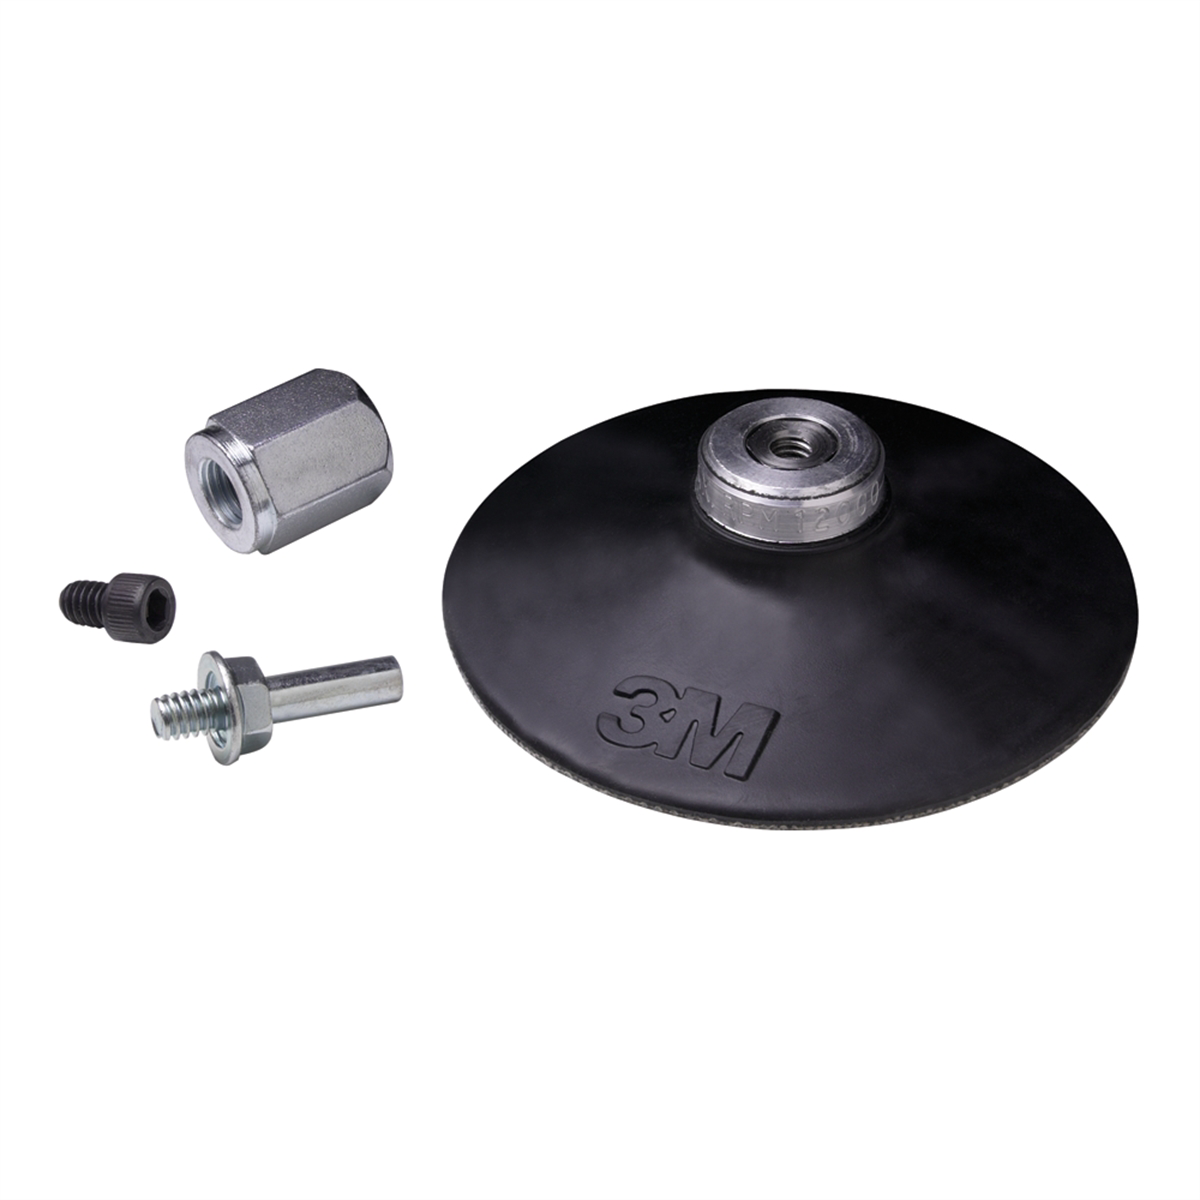 Roloc Disc Pad Assembly - 4In Diameter - 1/4In Shaft